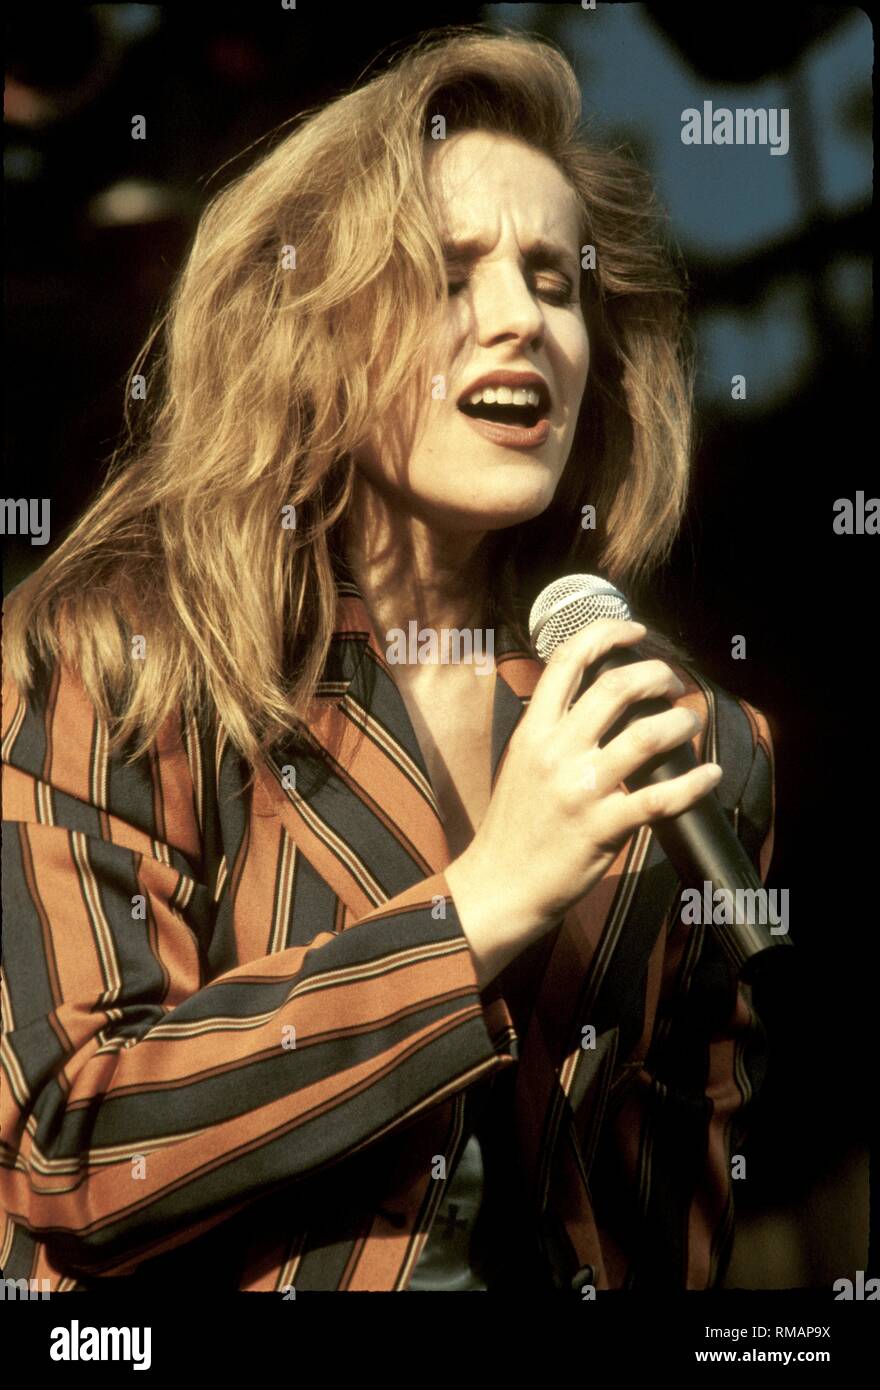 Pop and R&B singer Tara Kemp, best known for releasing two Top 10 singles, 'Hold You Tight' and 'Piece of My Heart,'  i shown performing on stage during a 'live' concert appearance. Stock Photo